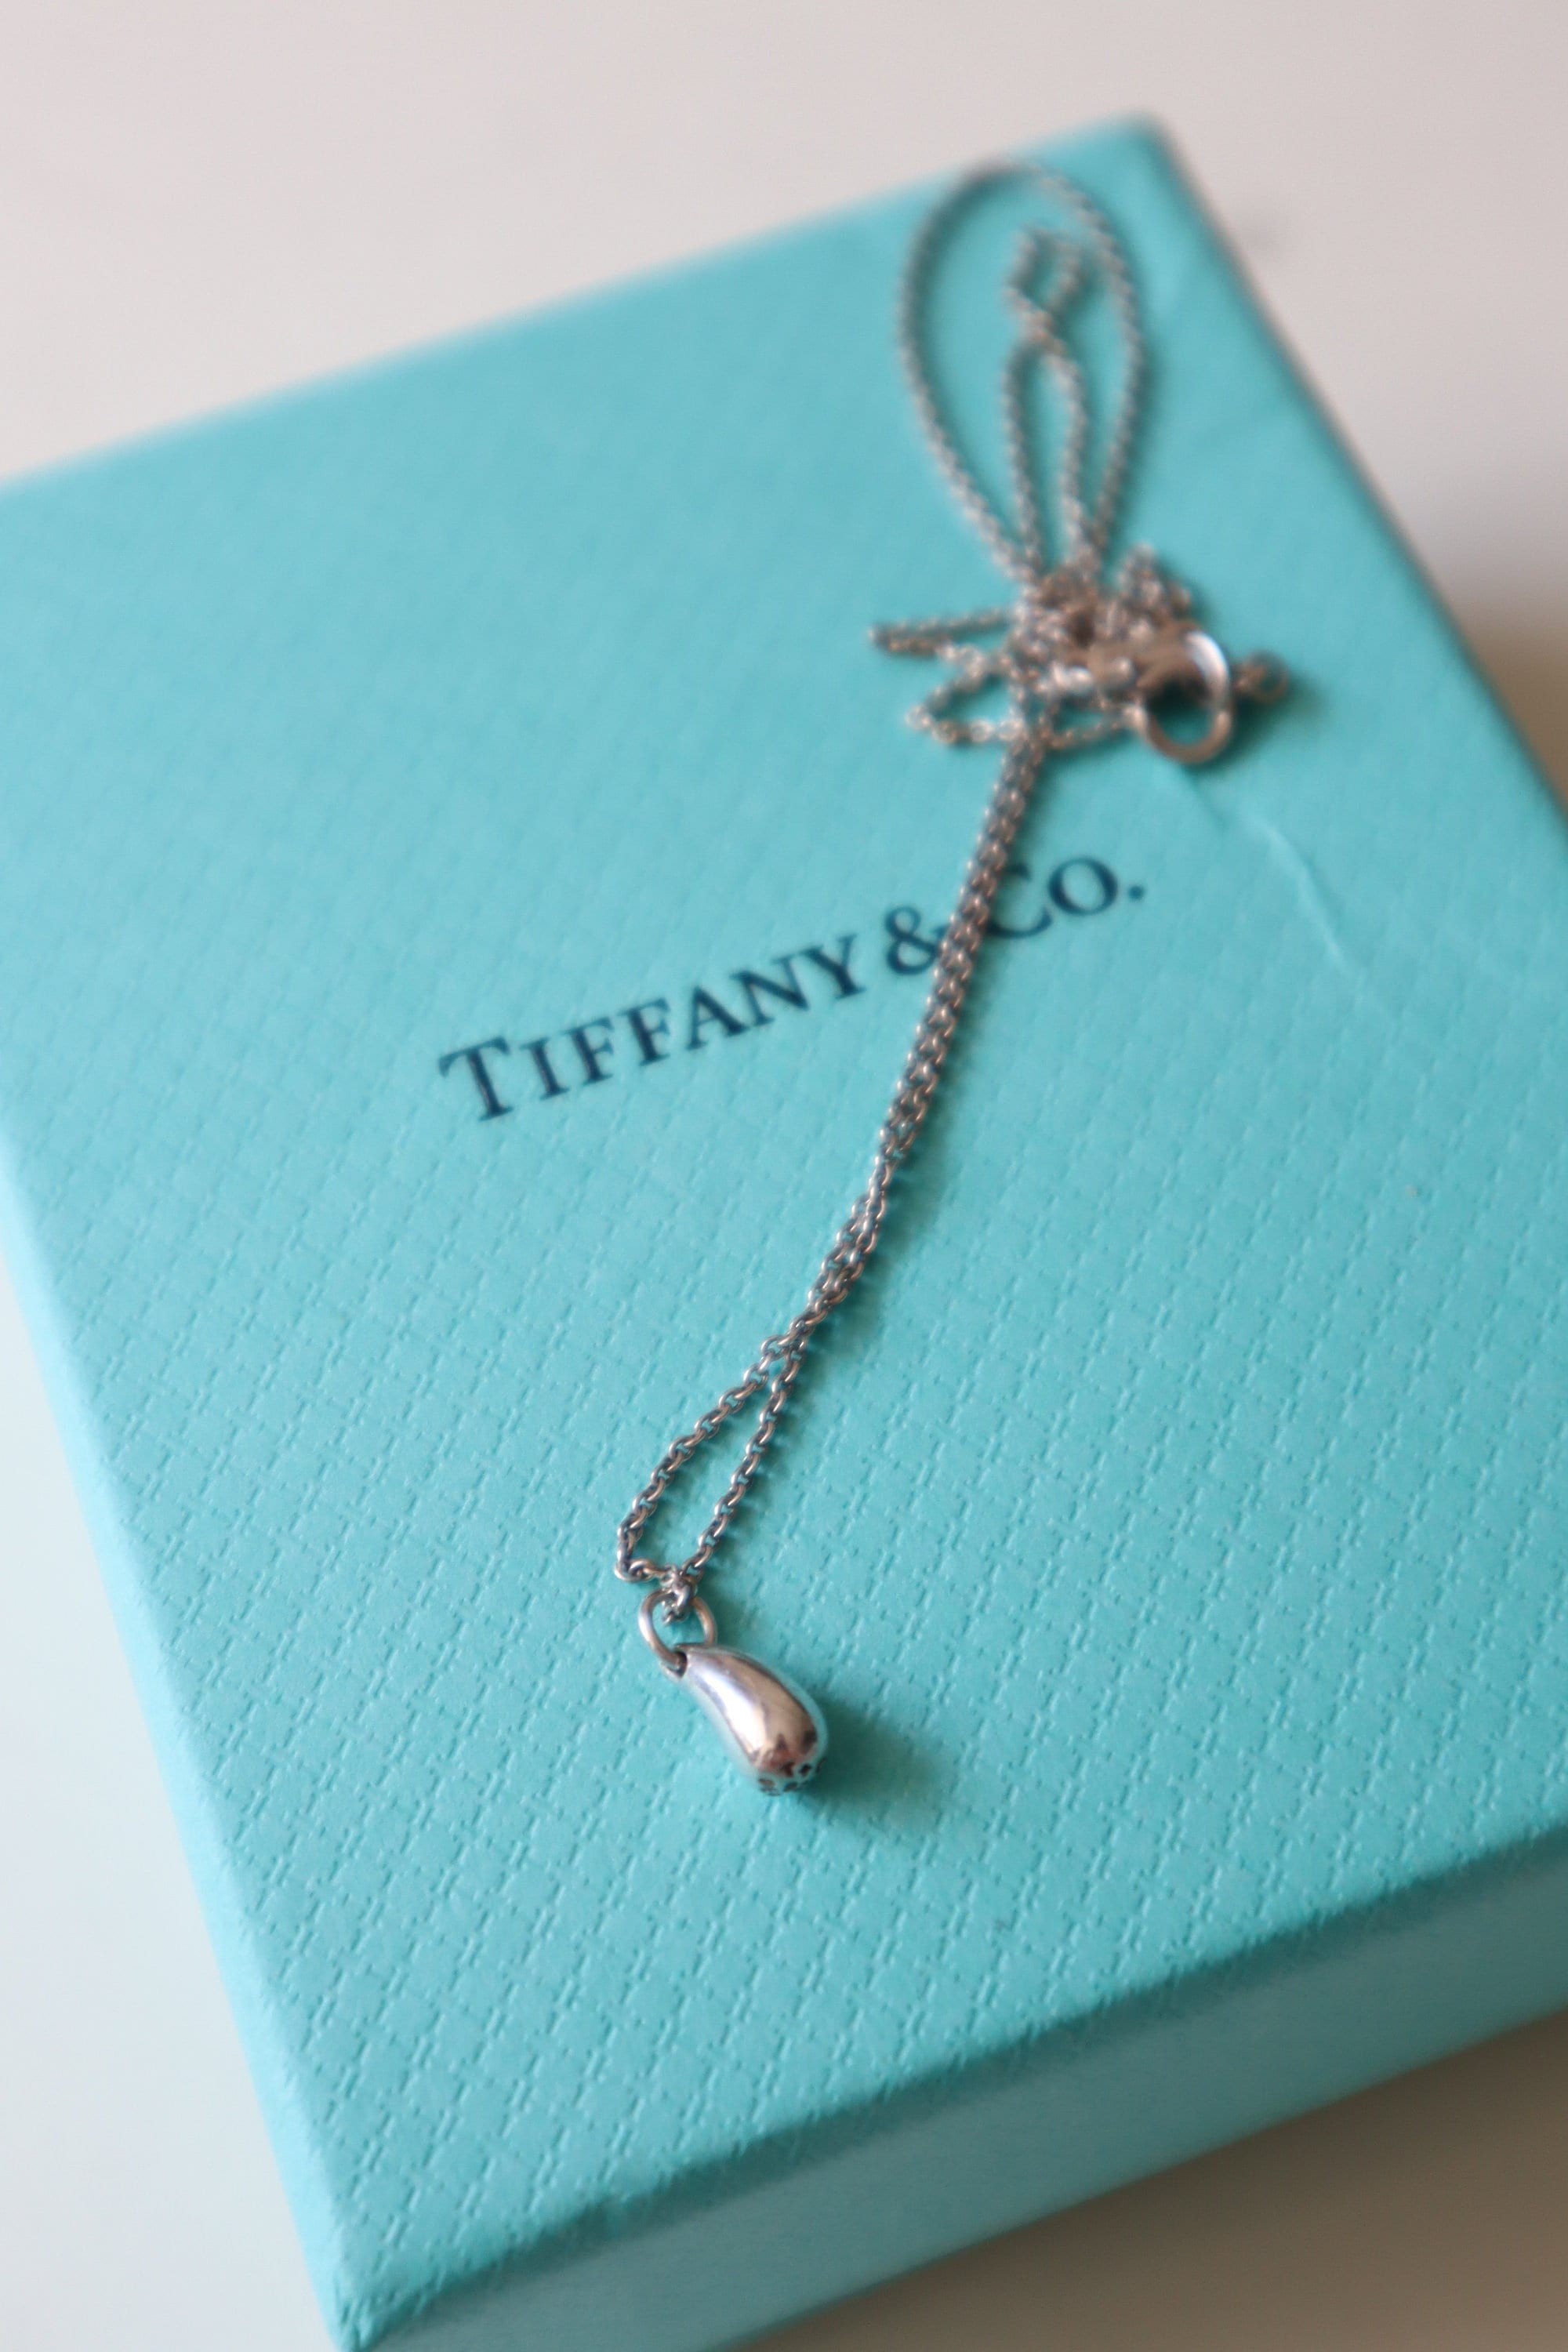 Tiffany & Co Teardrop Pendant and Chain in Sterling Silver 